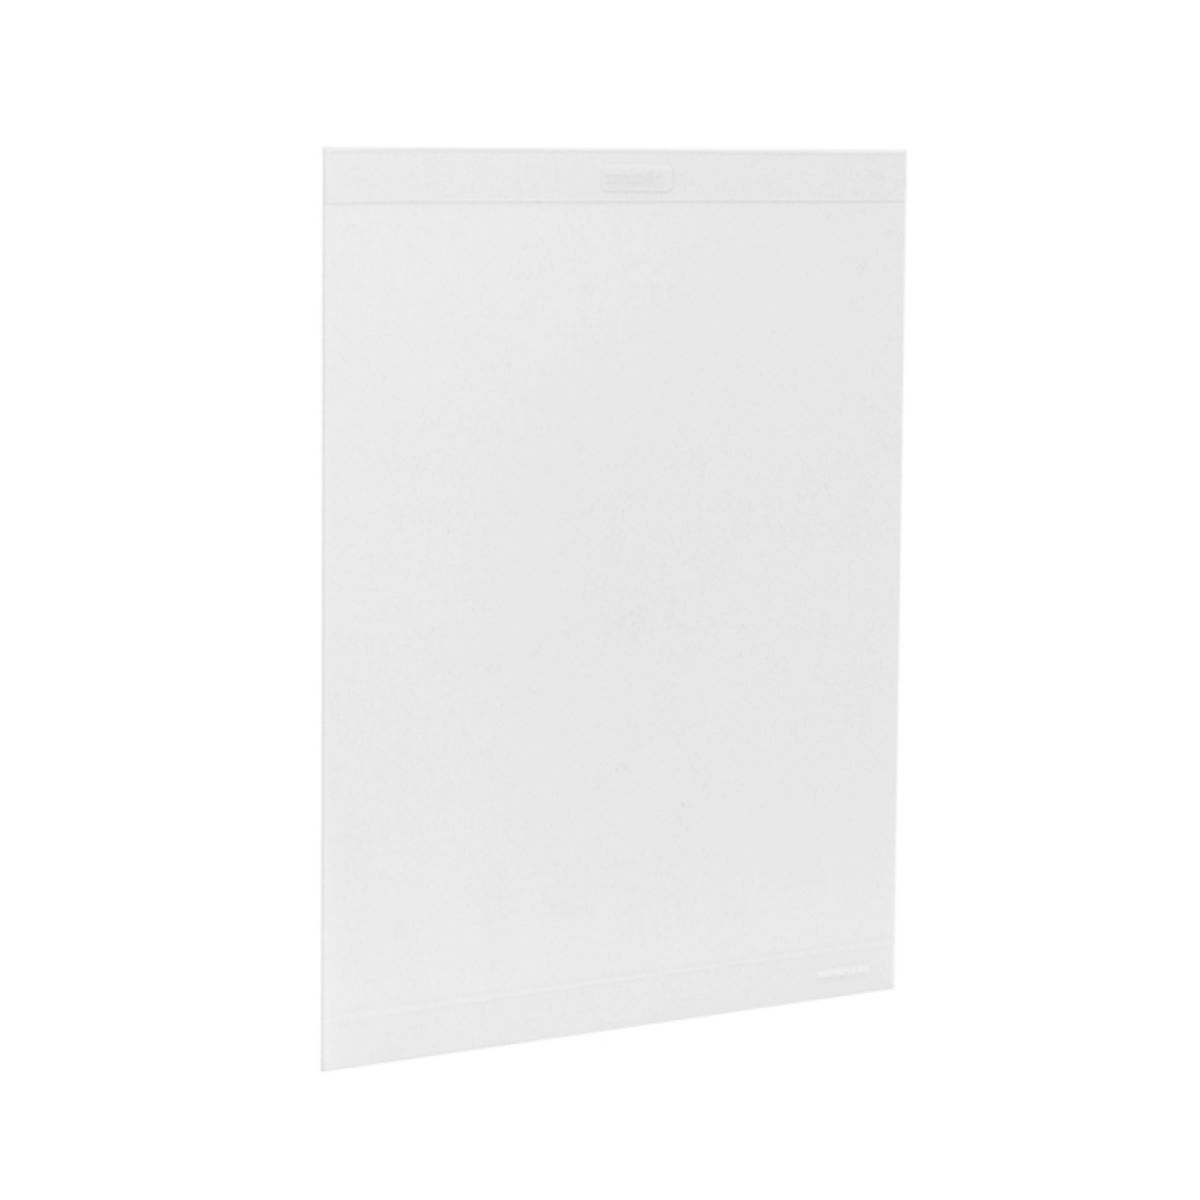 This adhesive window poster holder is made from anti-glare PVC.png